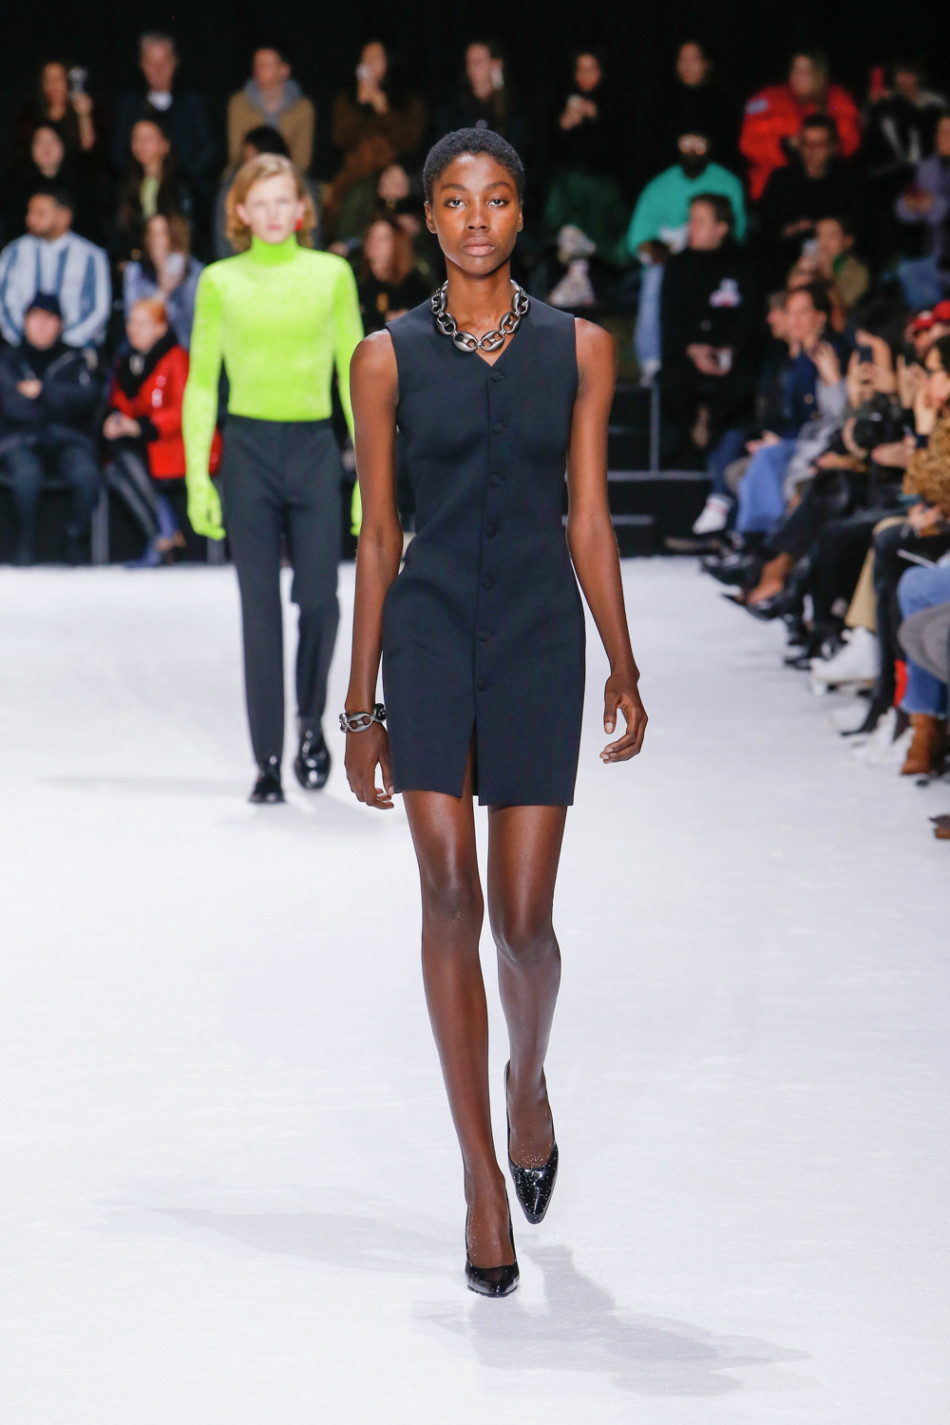 View our top looks from Balenciaga | Envelope